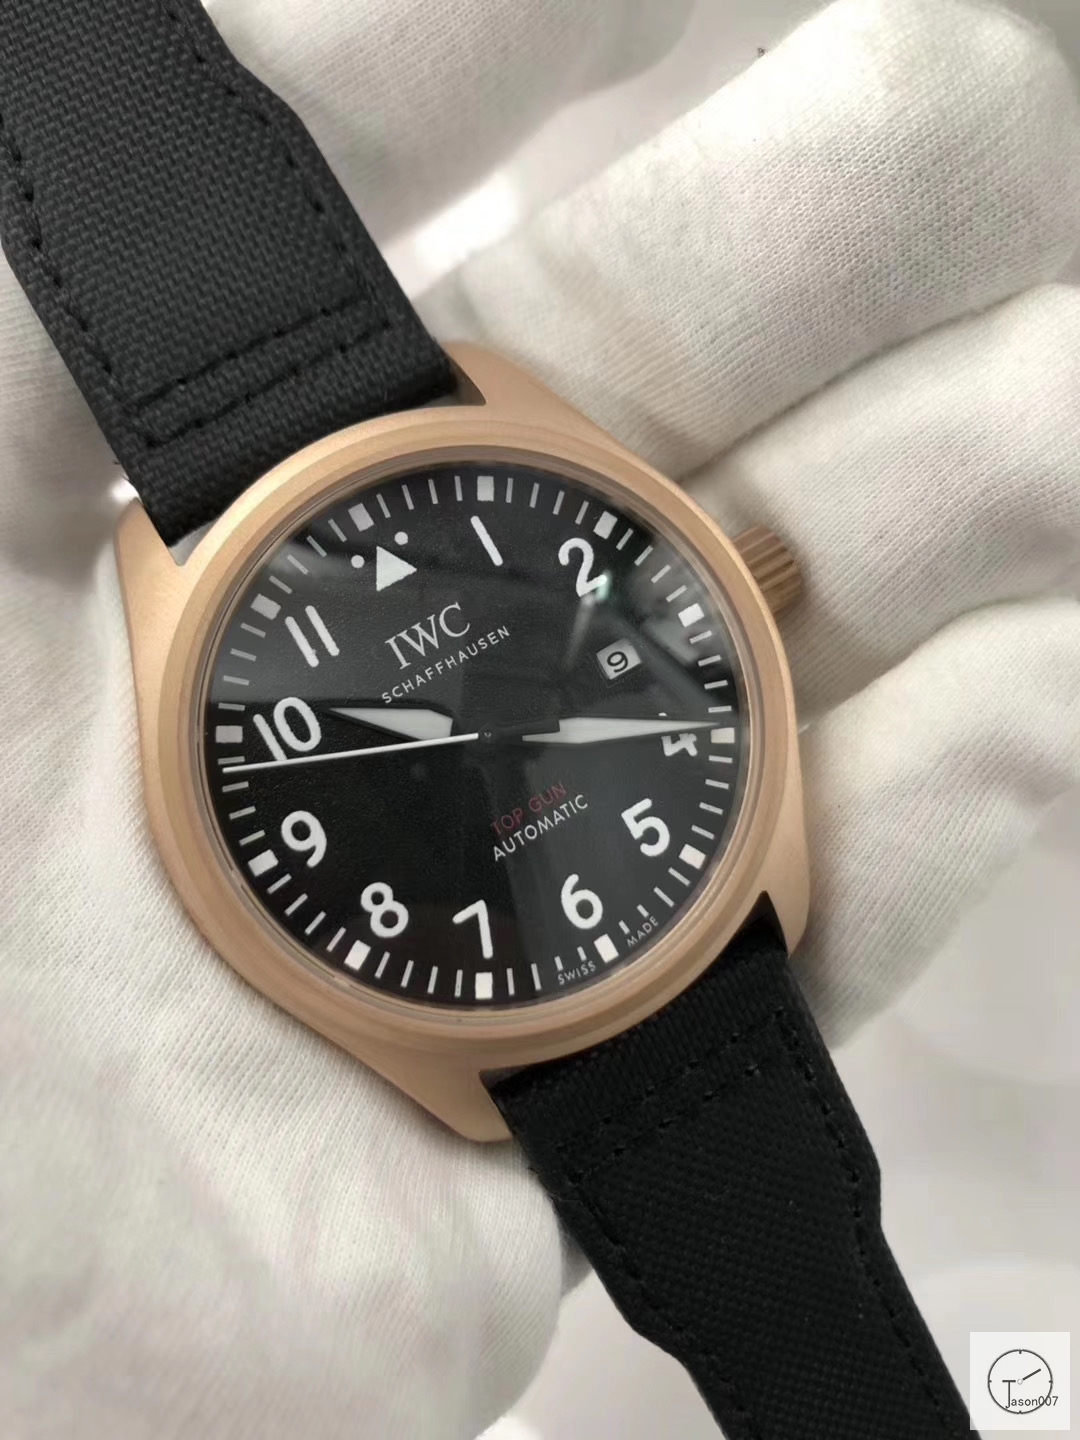 IWC PILOT'S SCHAFFHAUSEN Mark XV2 WATCH AUTOMATIC SPITFIRE AUTOMATIC Mechical IW326803 42MM BLACK DIAL Everose Gold Case Stainless Steel Case Stainless Steel Strap Mens Wristwatches ICW22270560